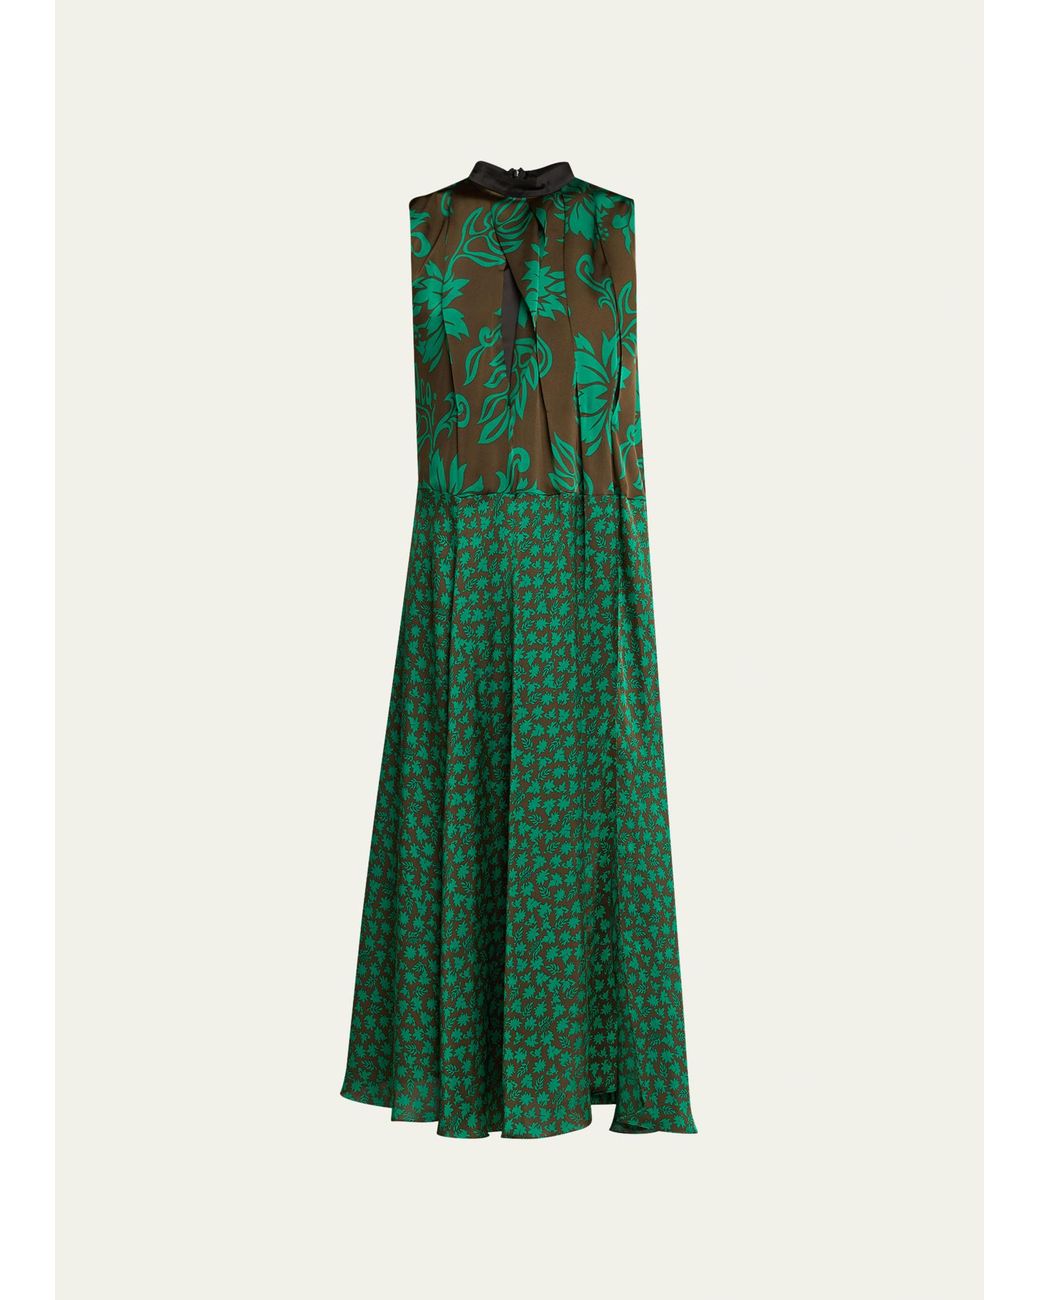 Sacai Floral-print Pleated Maxi Dress in Green | Lyst